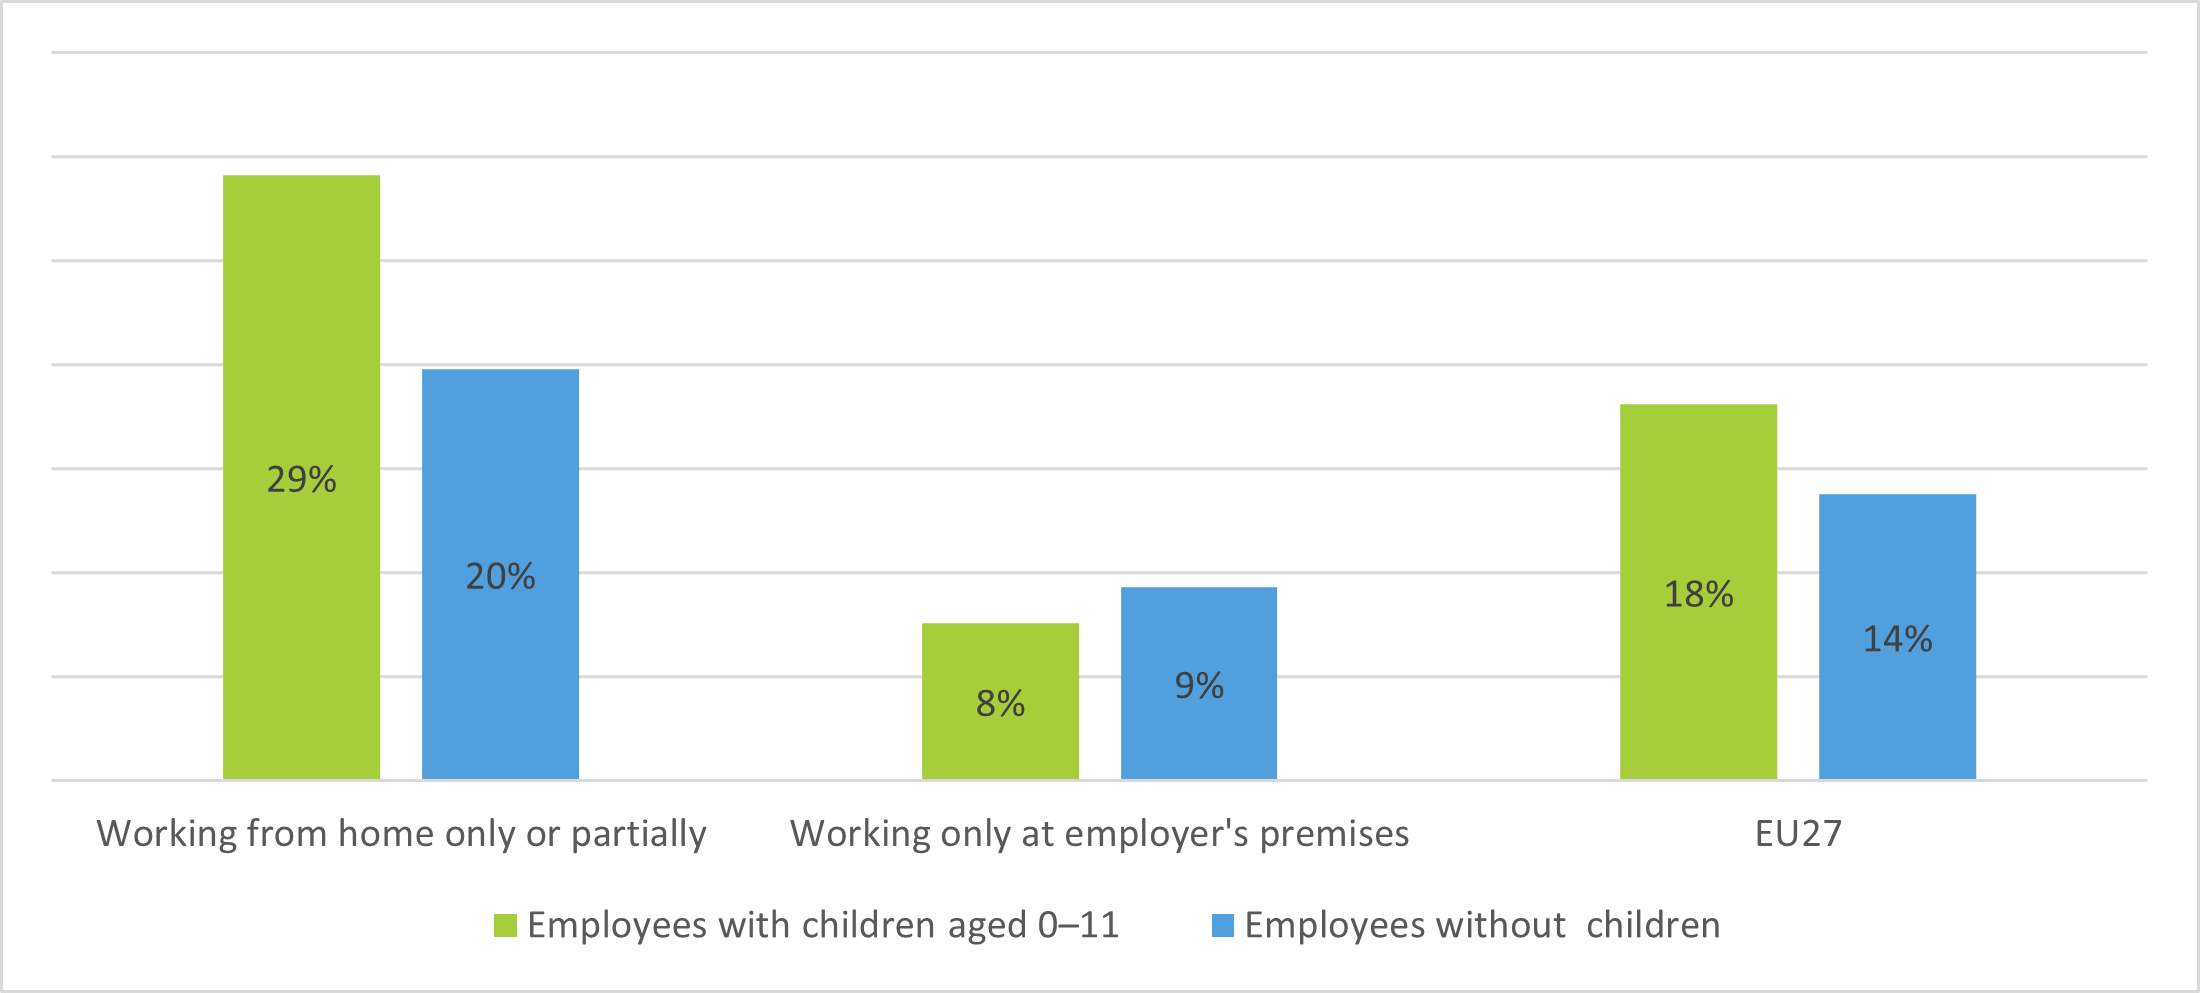 Figure 4: Percentage of full-time employees who worked in their free time, by place of work and parental status, EU27, March 2021